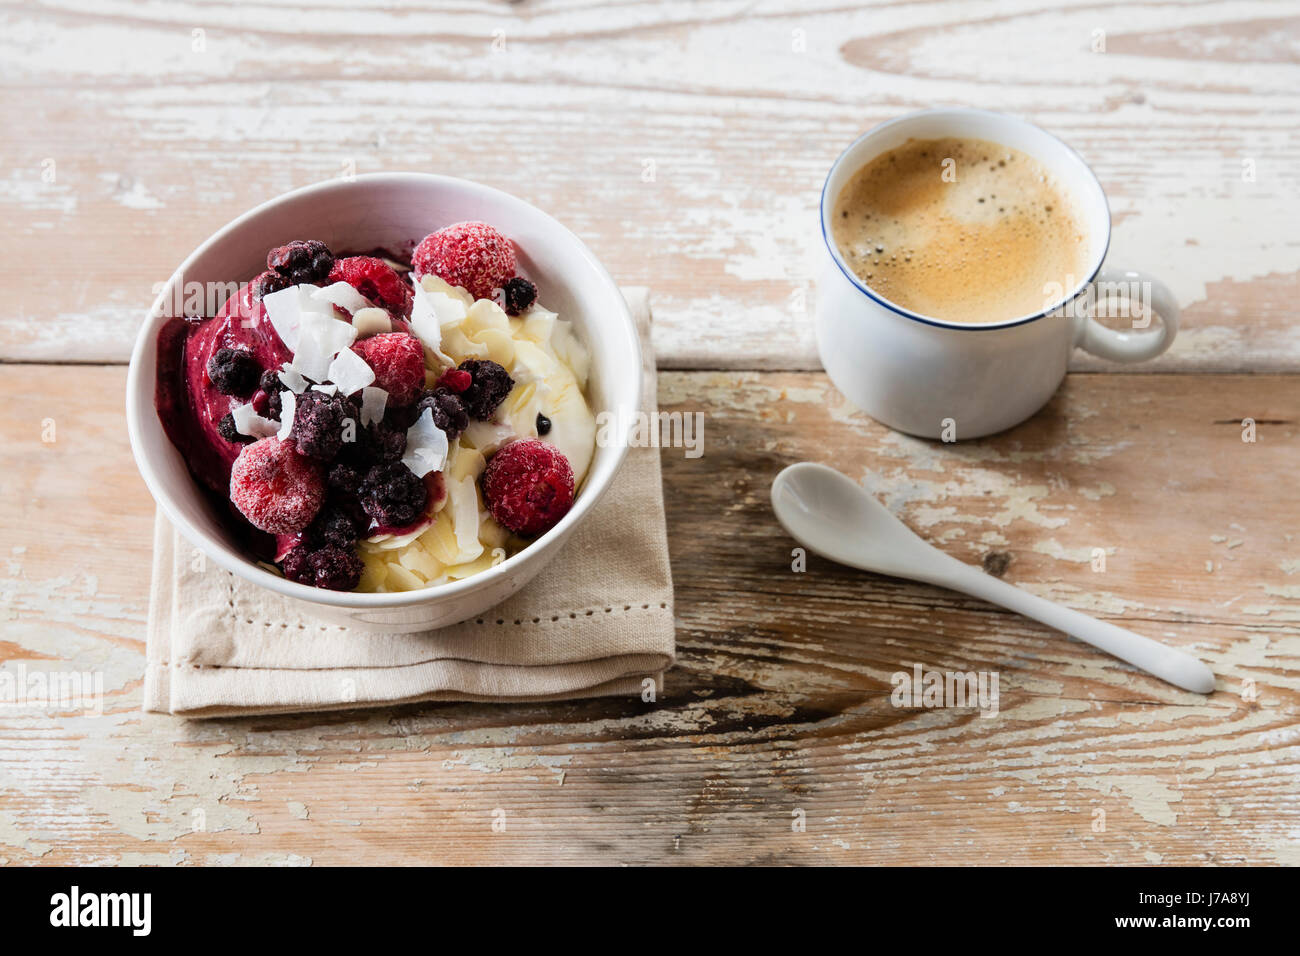 Bowl of nana icecream and cup of coffee Stock Photo